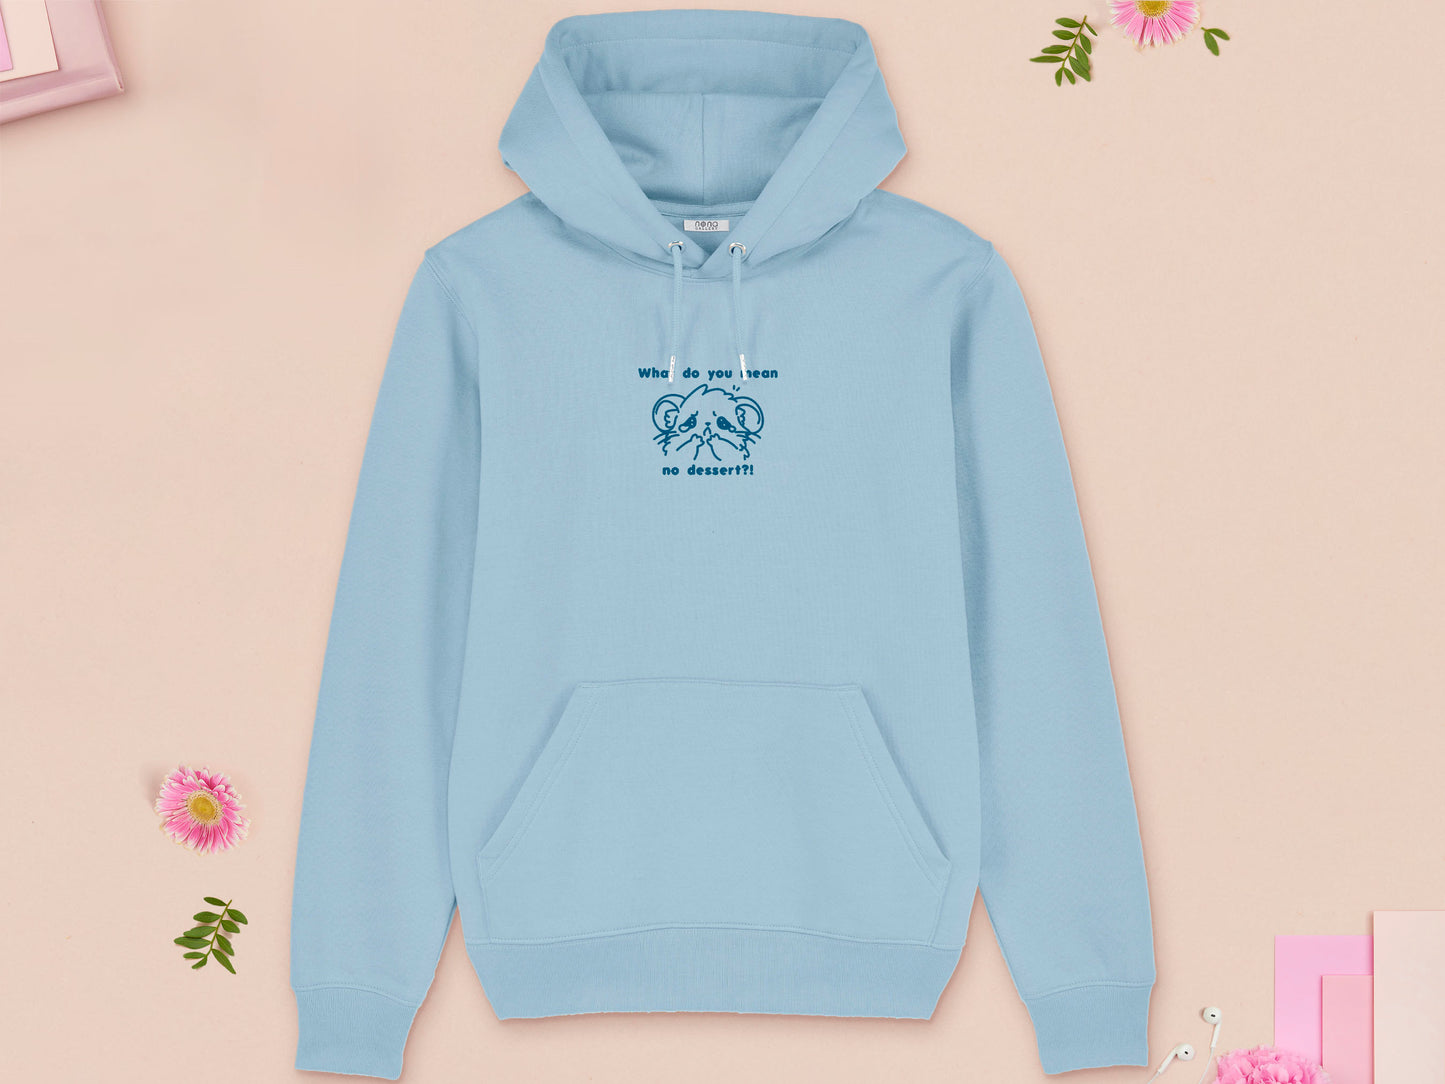 "What Do You Mean No Dessert?!" Hamster T-shirt or Hoodie